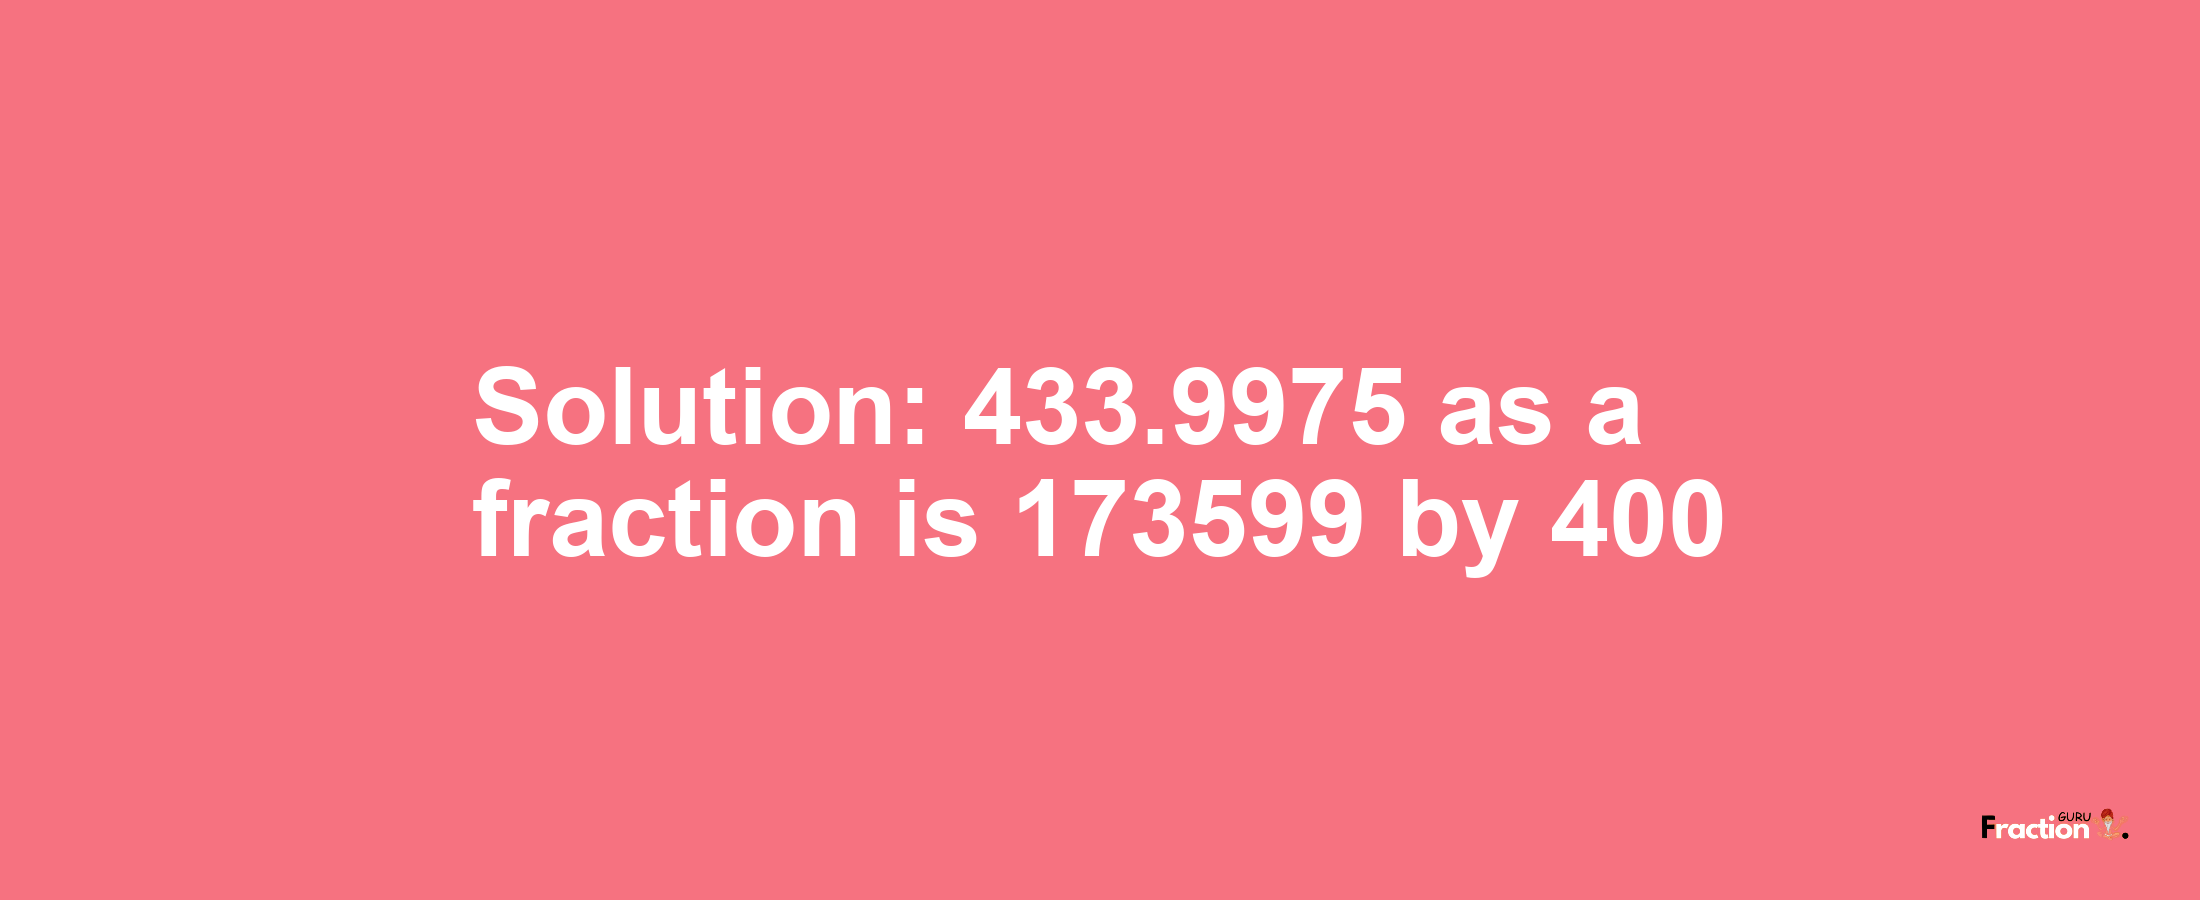 Solution:433.9975 as a fraction is 173599/400